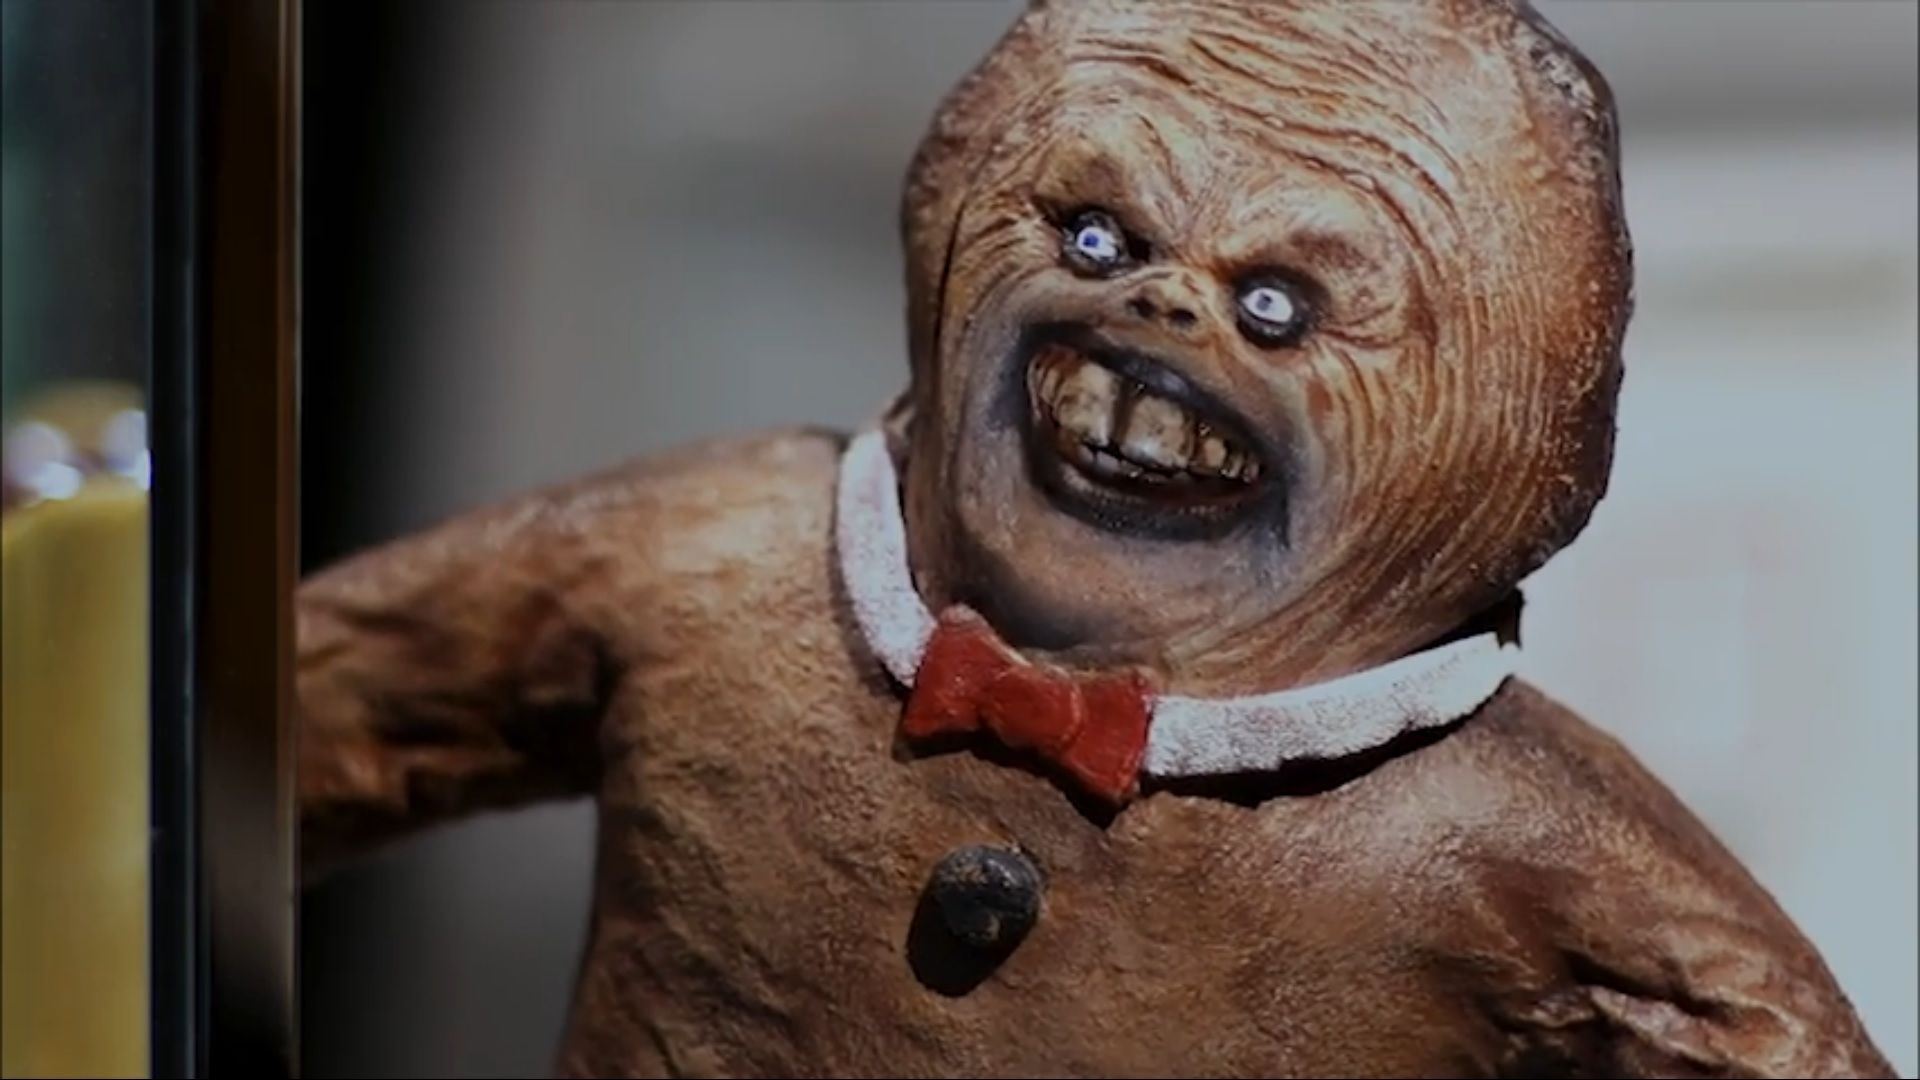 The Gingerdead Man from The Gingerdead Man Movies